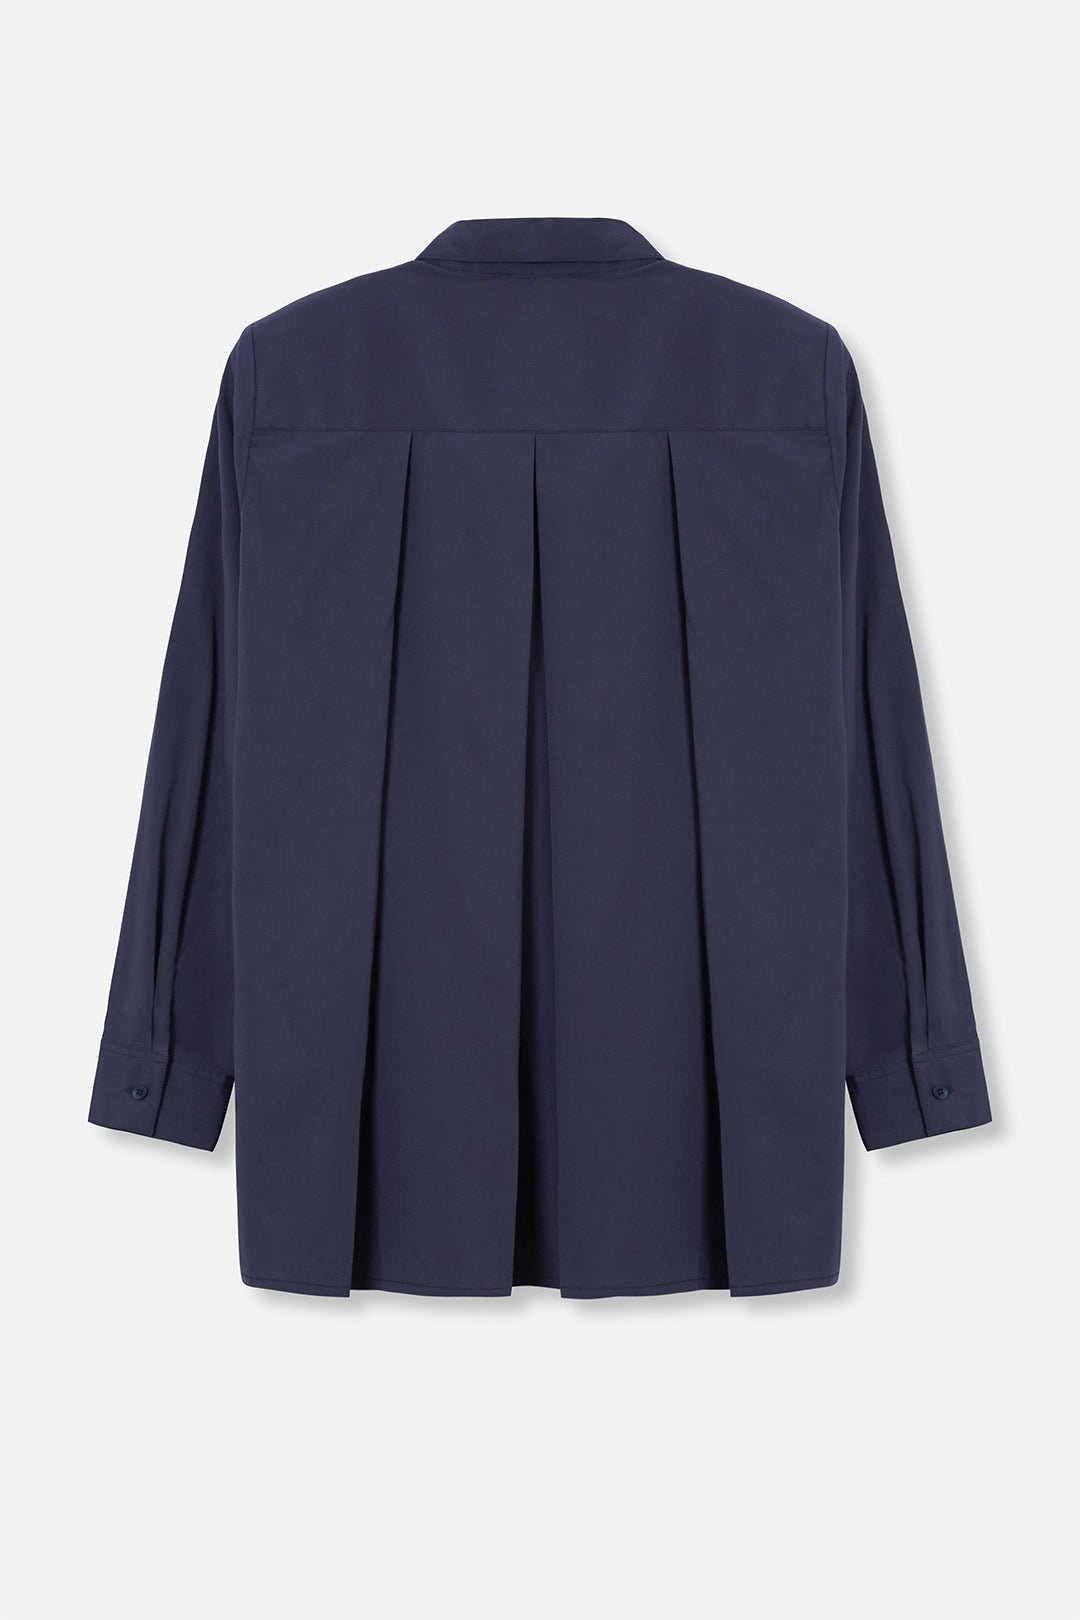 SCOUT PLEAT BACK SHIRT IN ITALIAN STRETCH COTTON NAVY - Jarbo